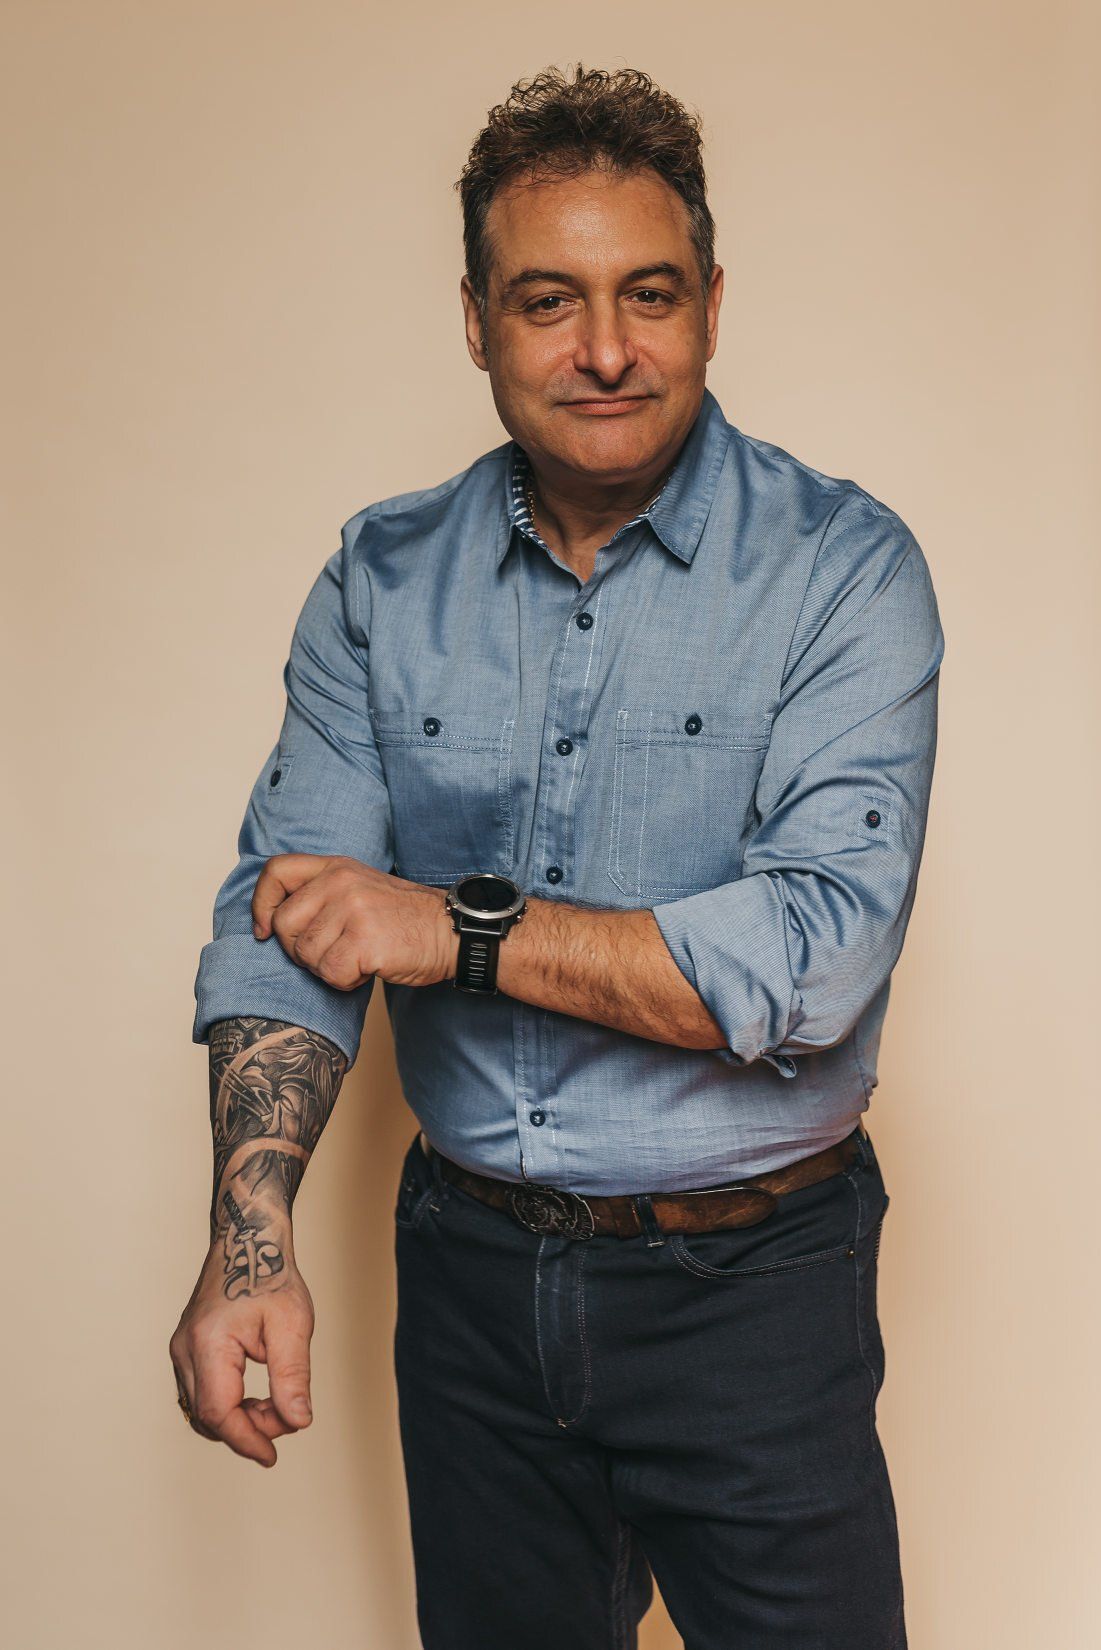 Toronto Greektown business owner rolling up his sleeves in a headshot photo